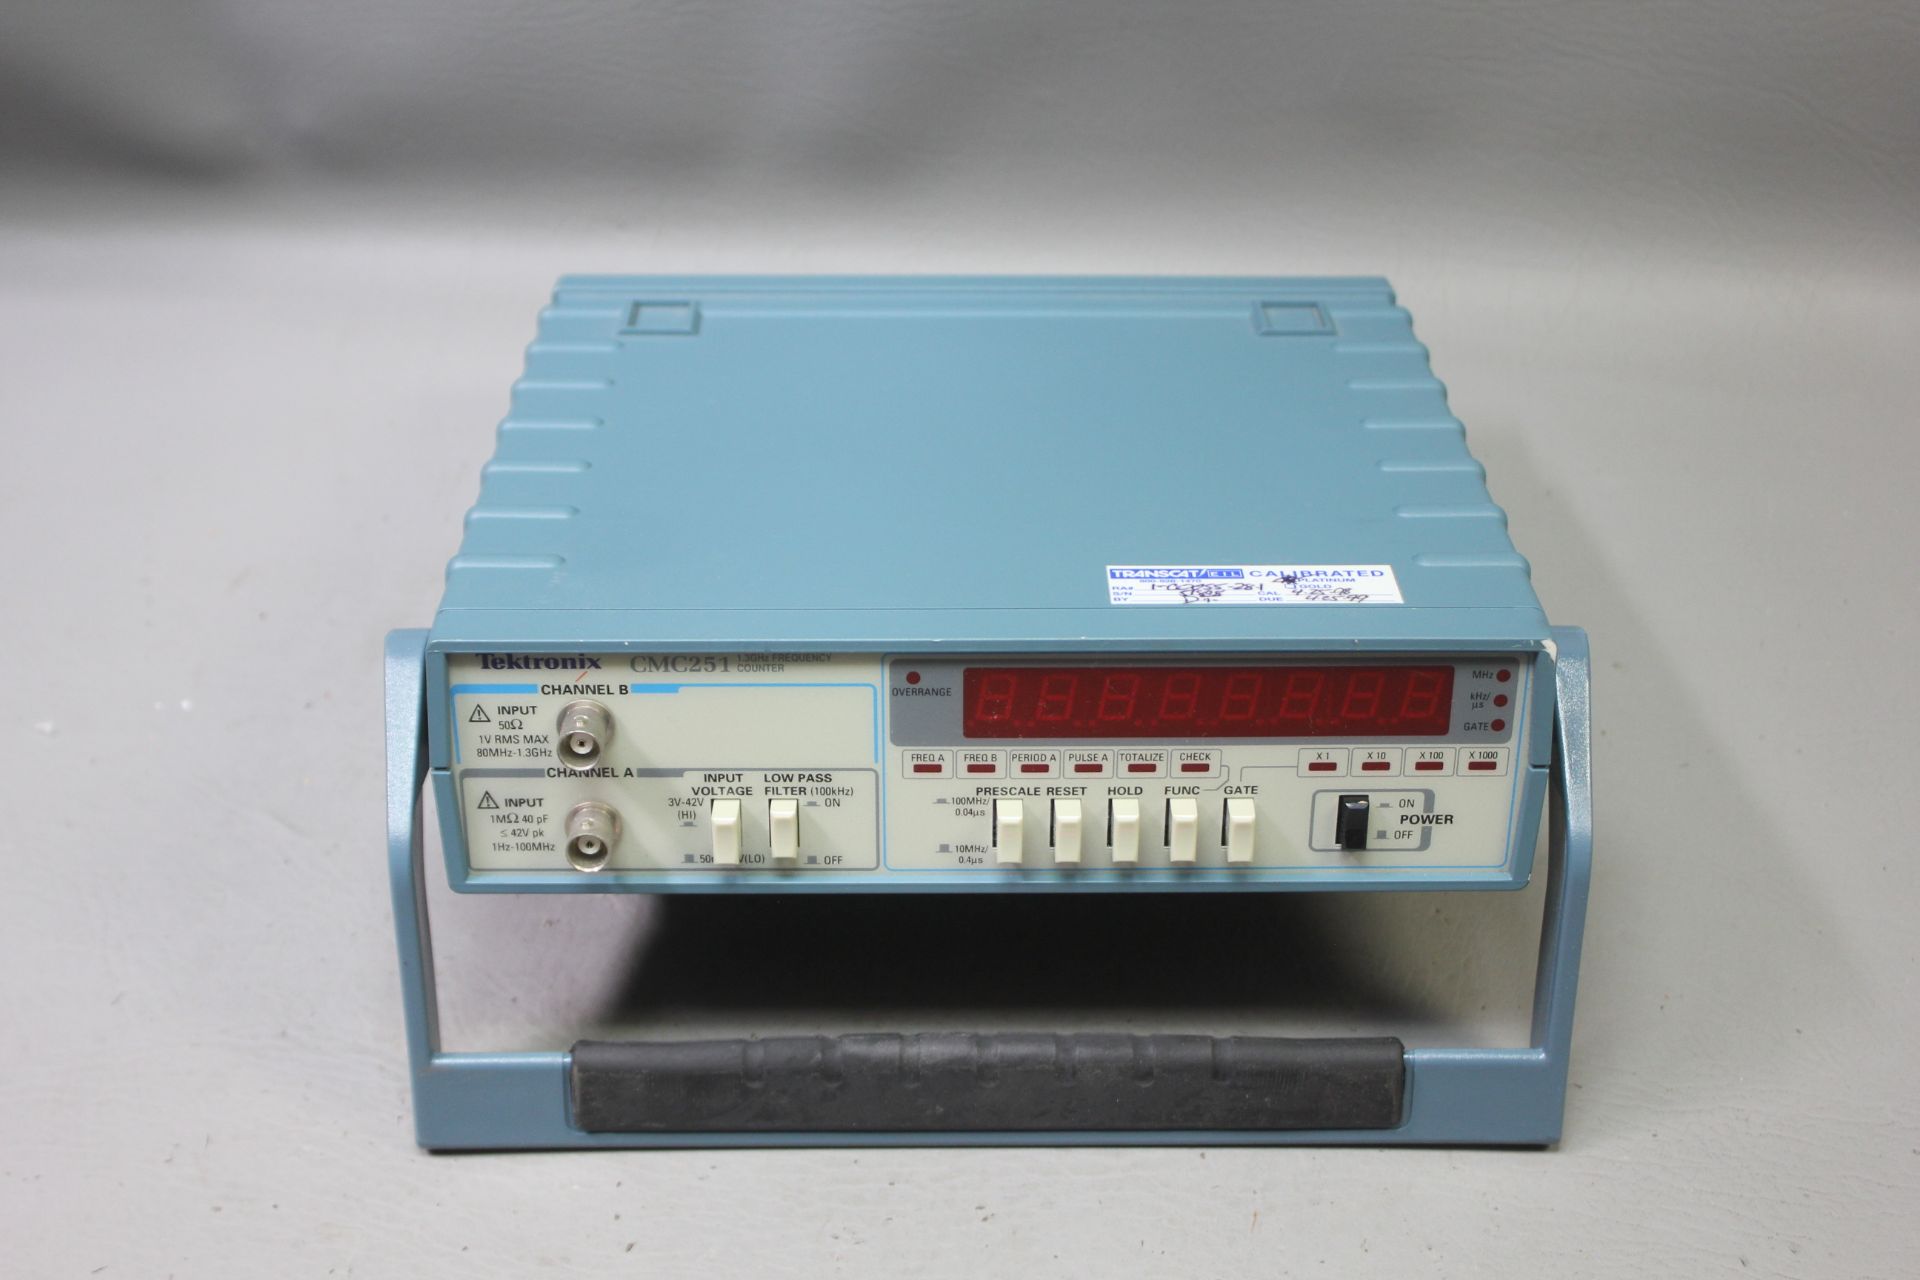 TEKTRONIX 1.3GHZ FREQUENCY COUNTER